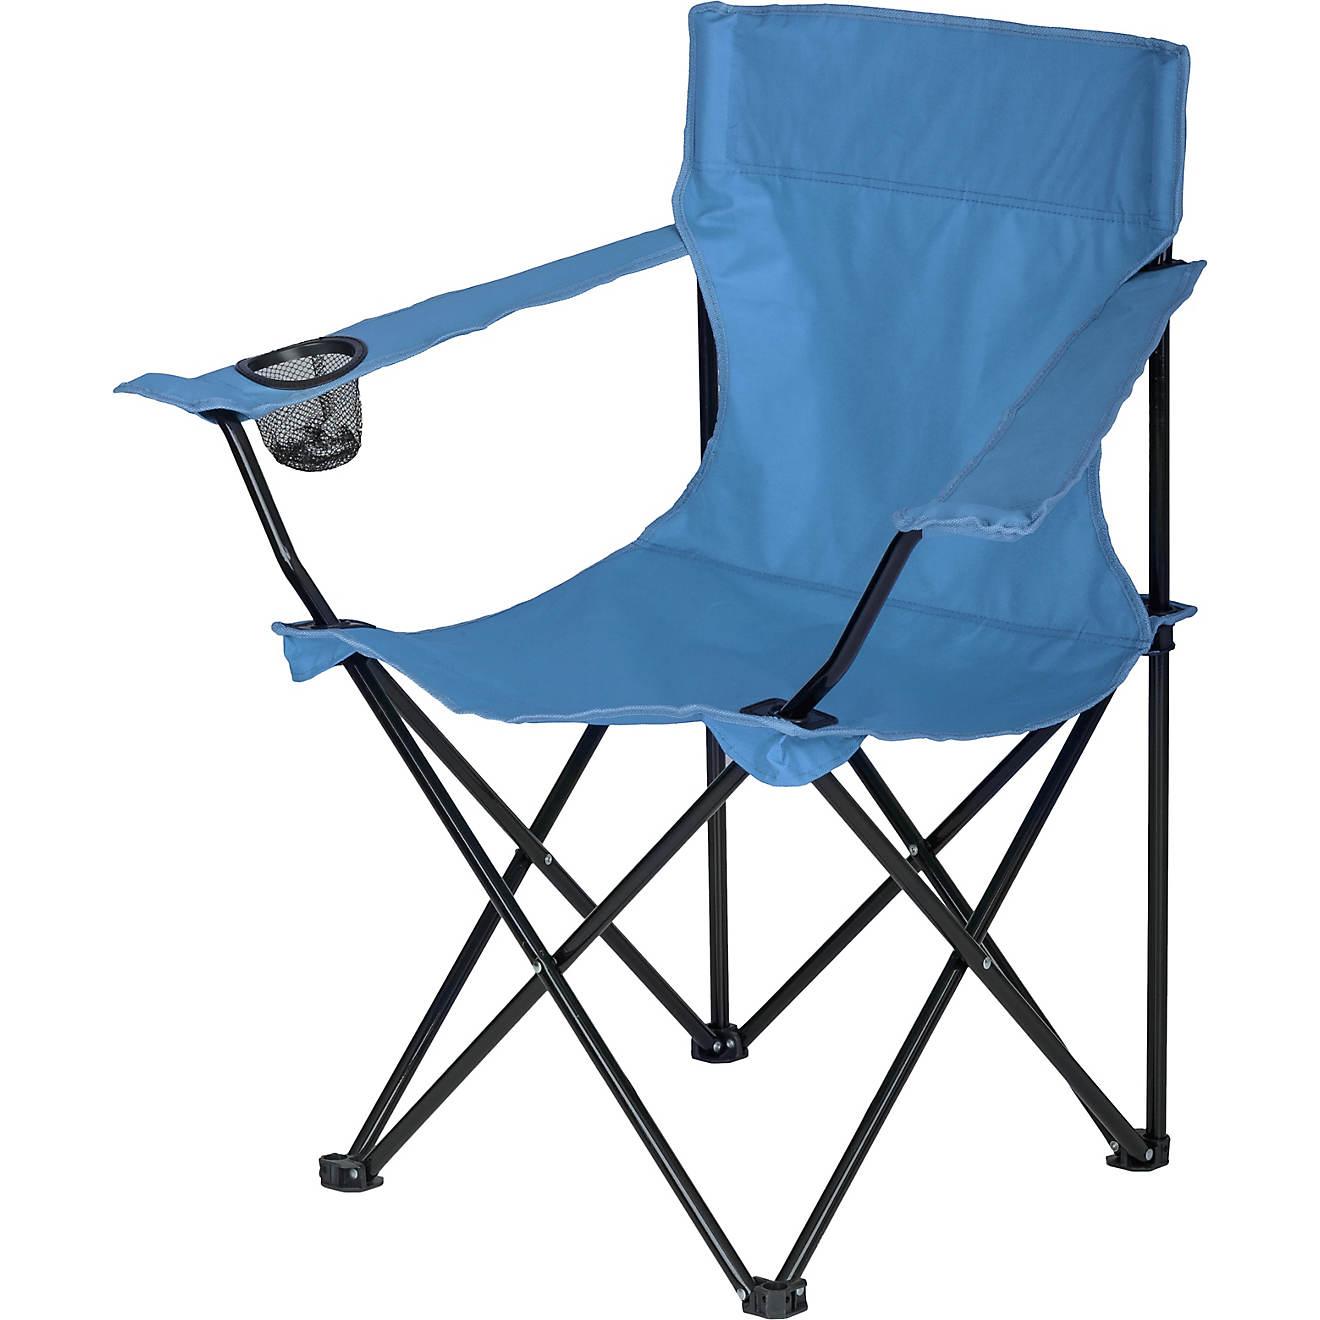 Academy Sports Logo Folding Camp Chair for $4.99